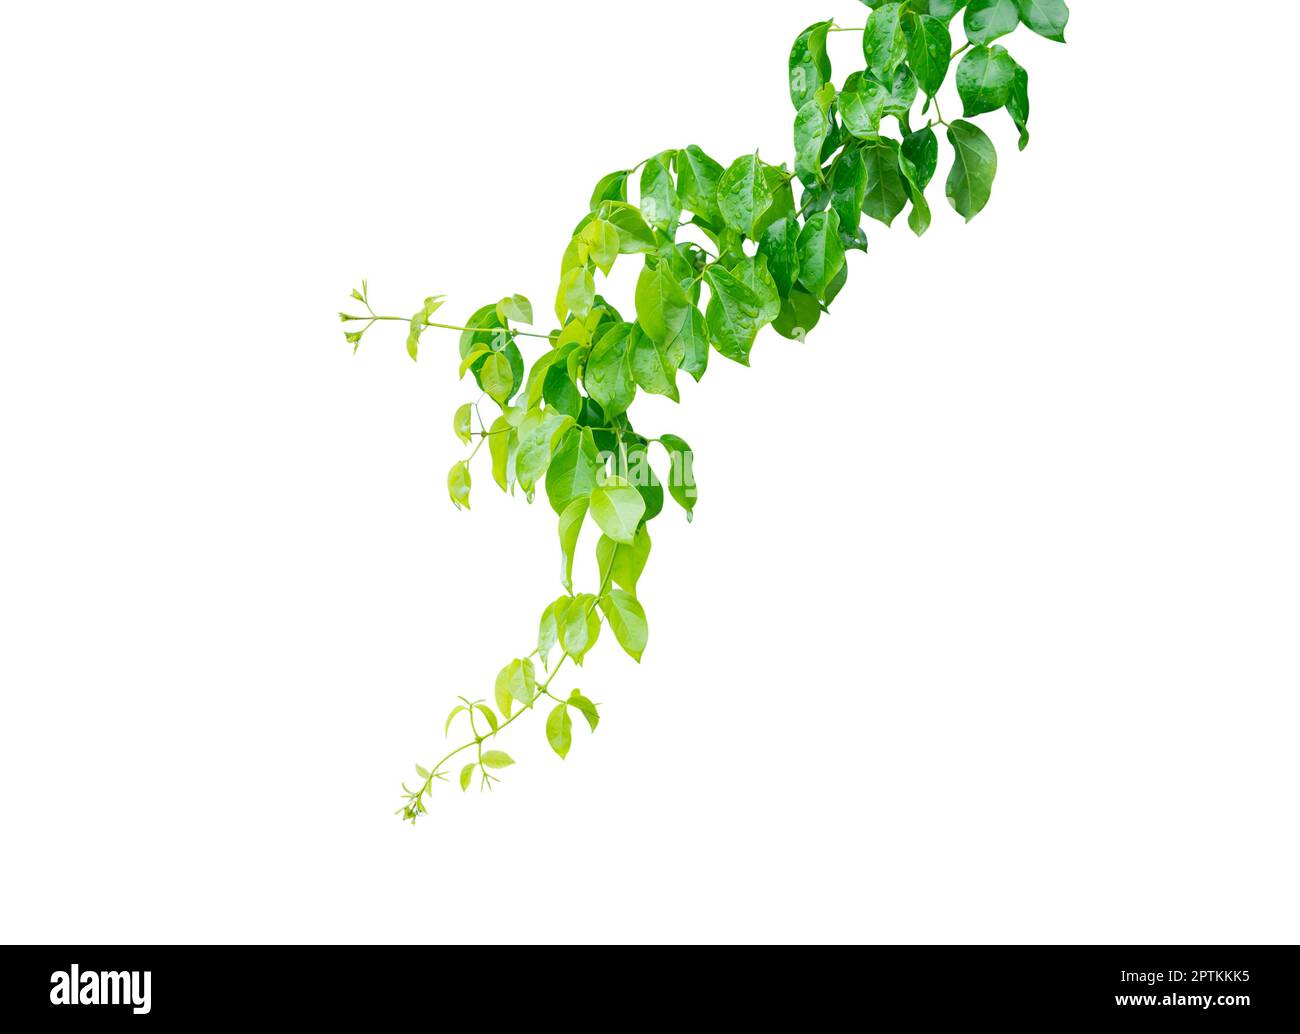 Vine ivy plant with green leaves heart shaped, Isolated on a white background with clipping path. Stock Photo